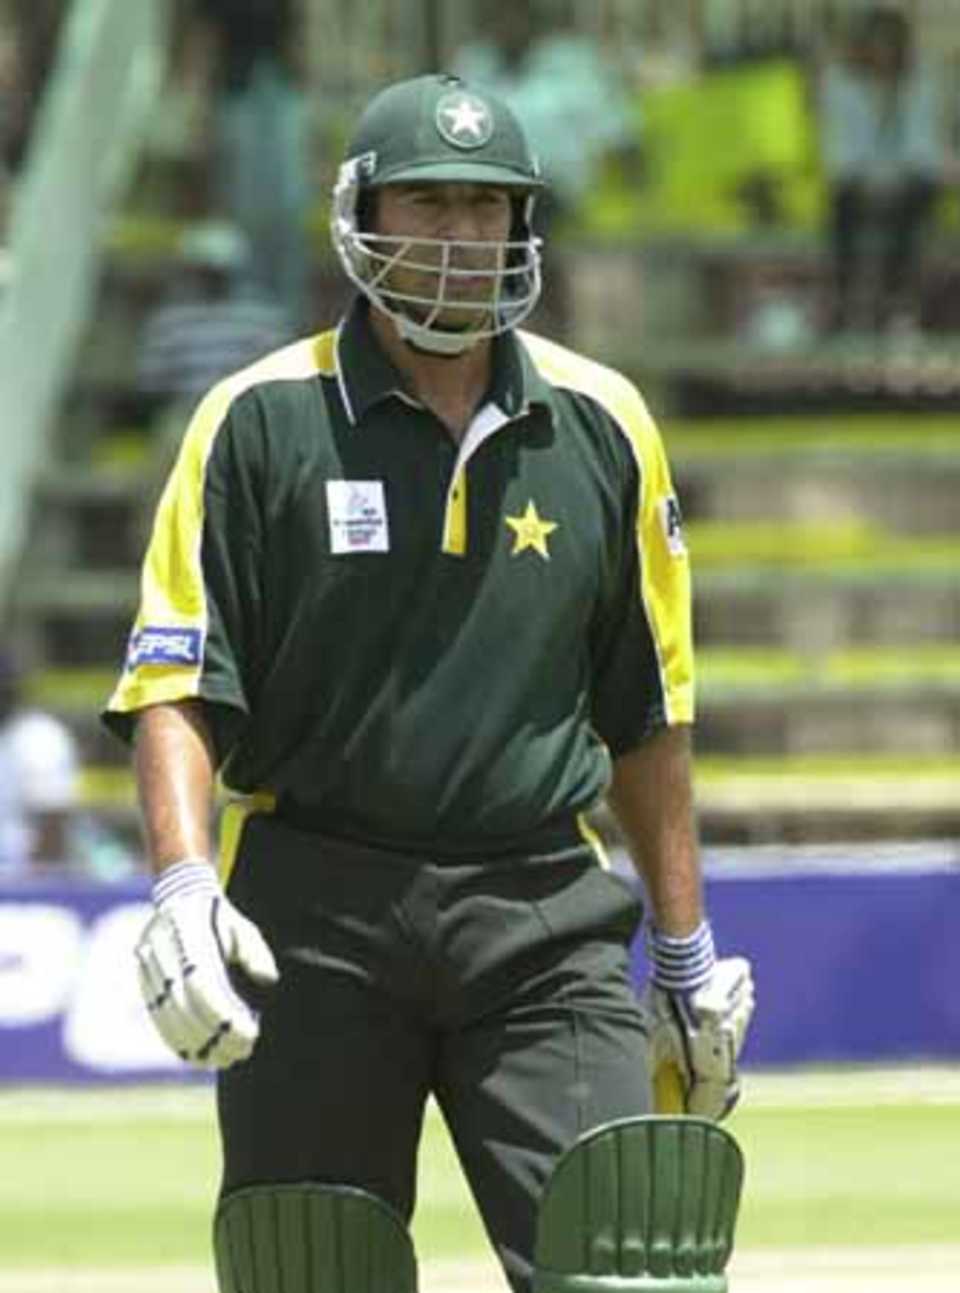 Wasim Akram at the end of his innings, run out.